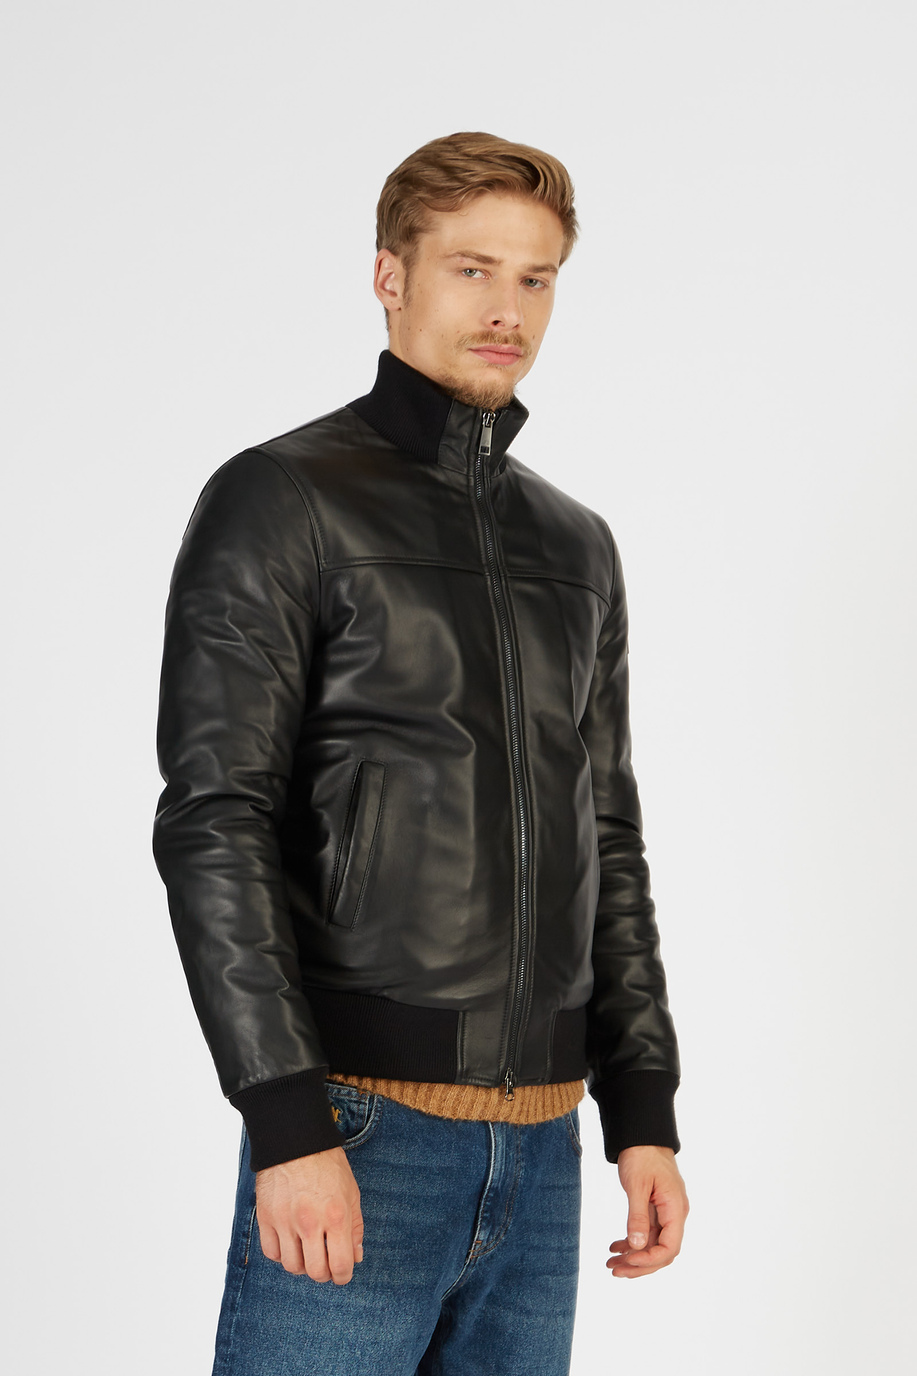 Blue Ribbon leather jacket with regular fit zip front closure - Outerwear | La Martina - Official Online Shop